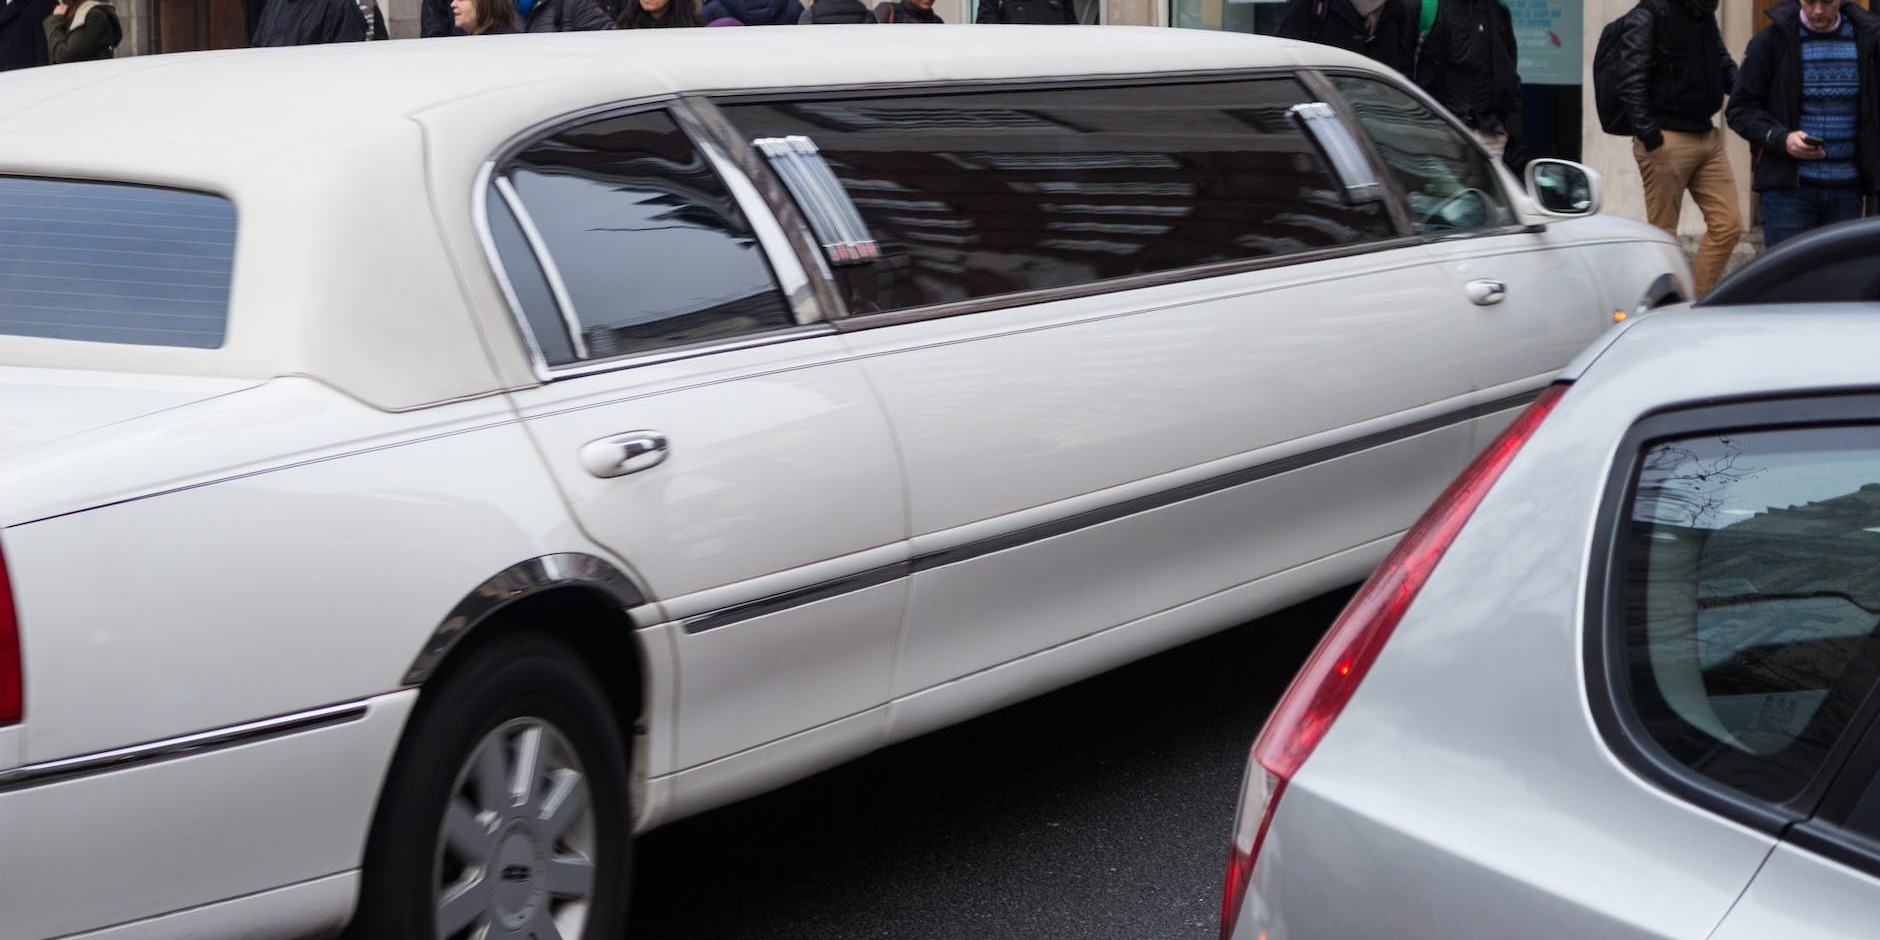 Top Tips for a Memorable Limo Hire Experience in the UK